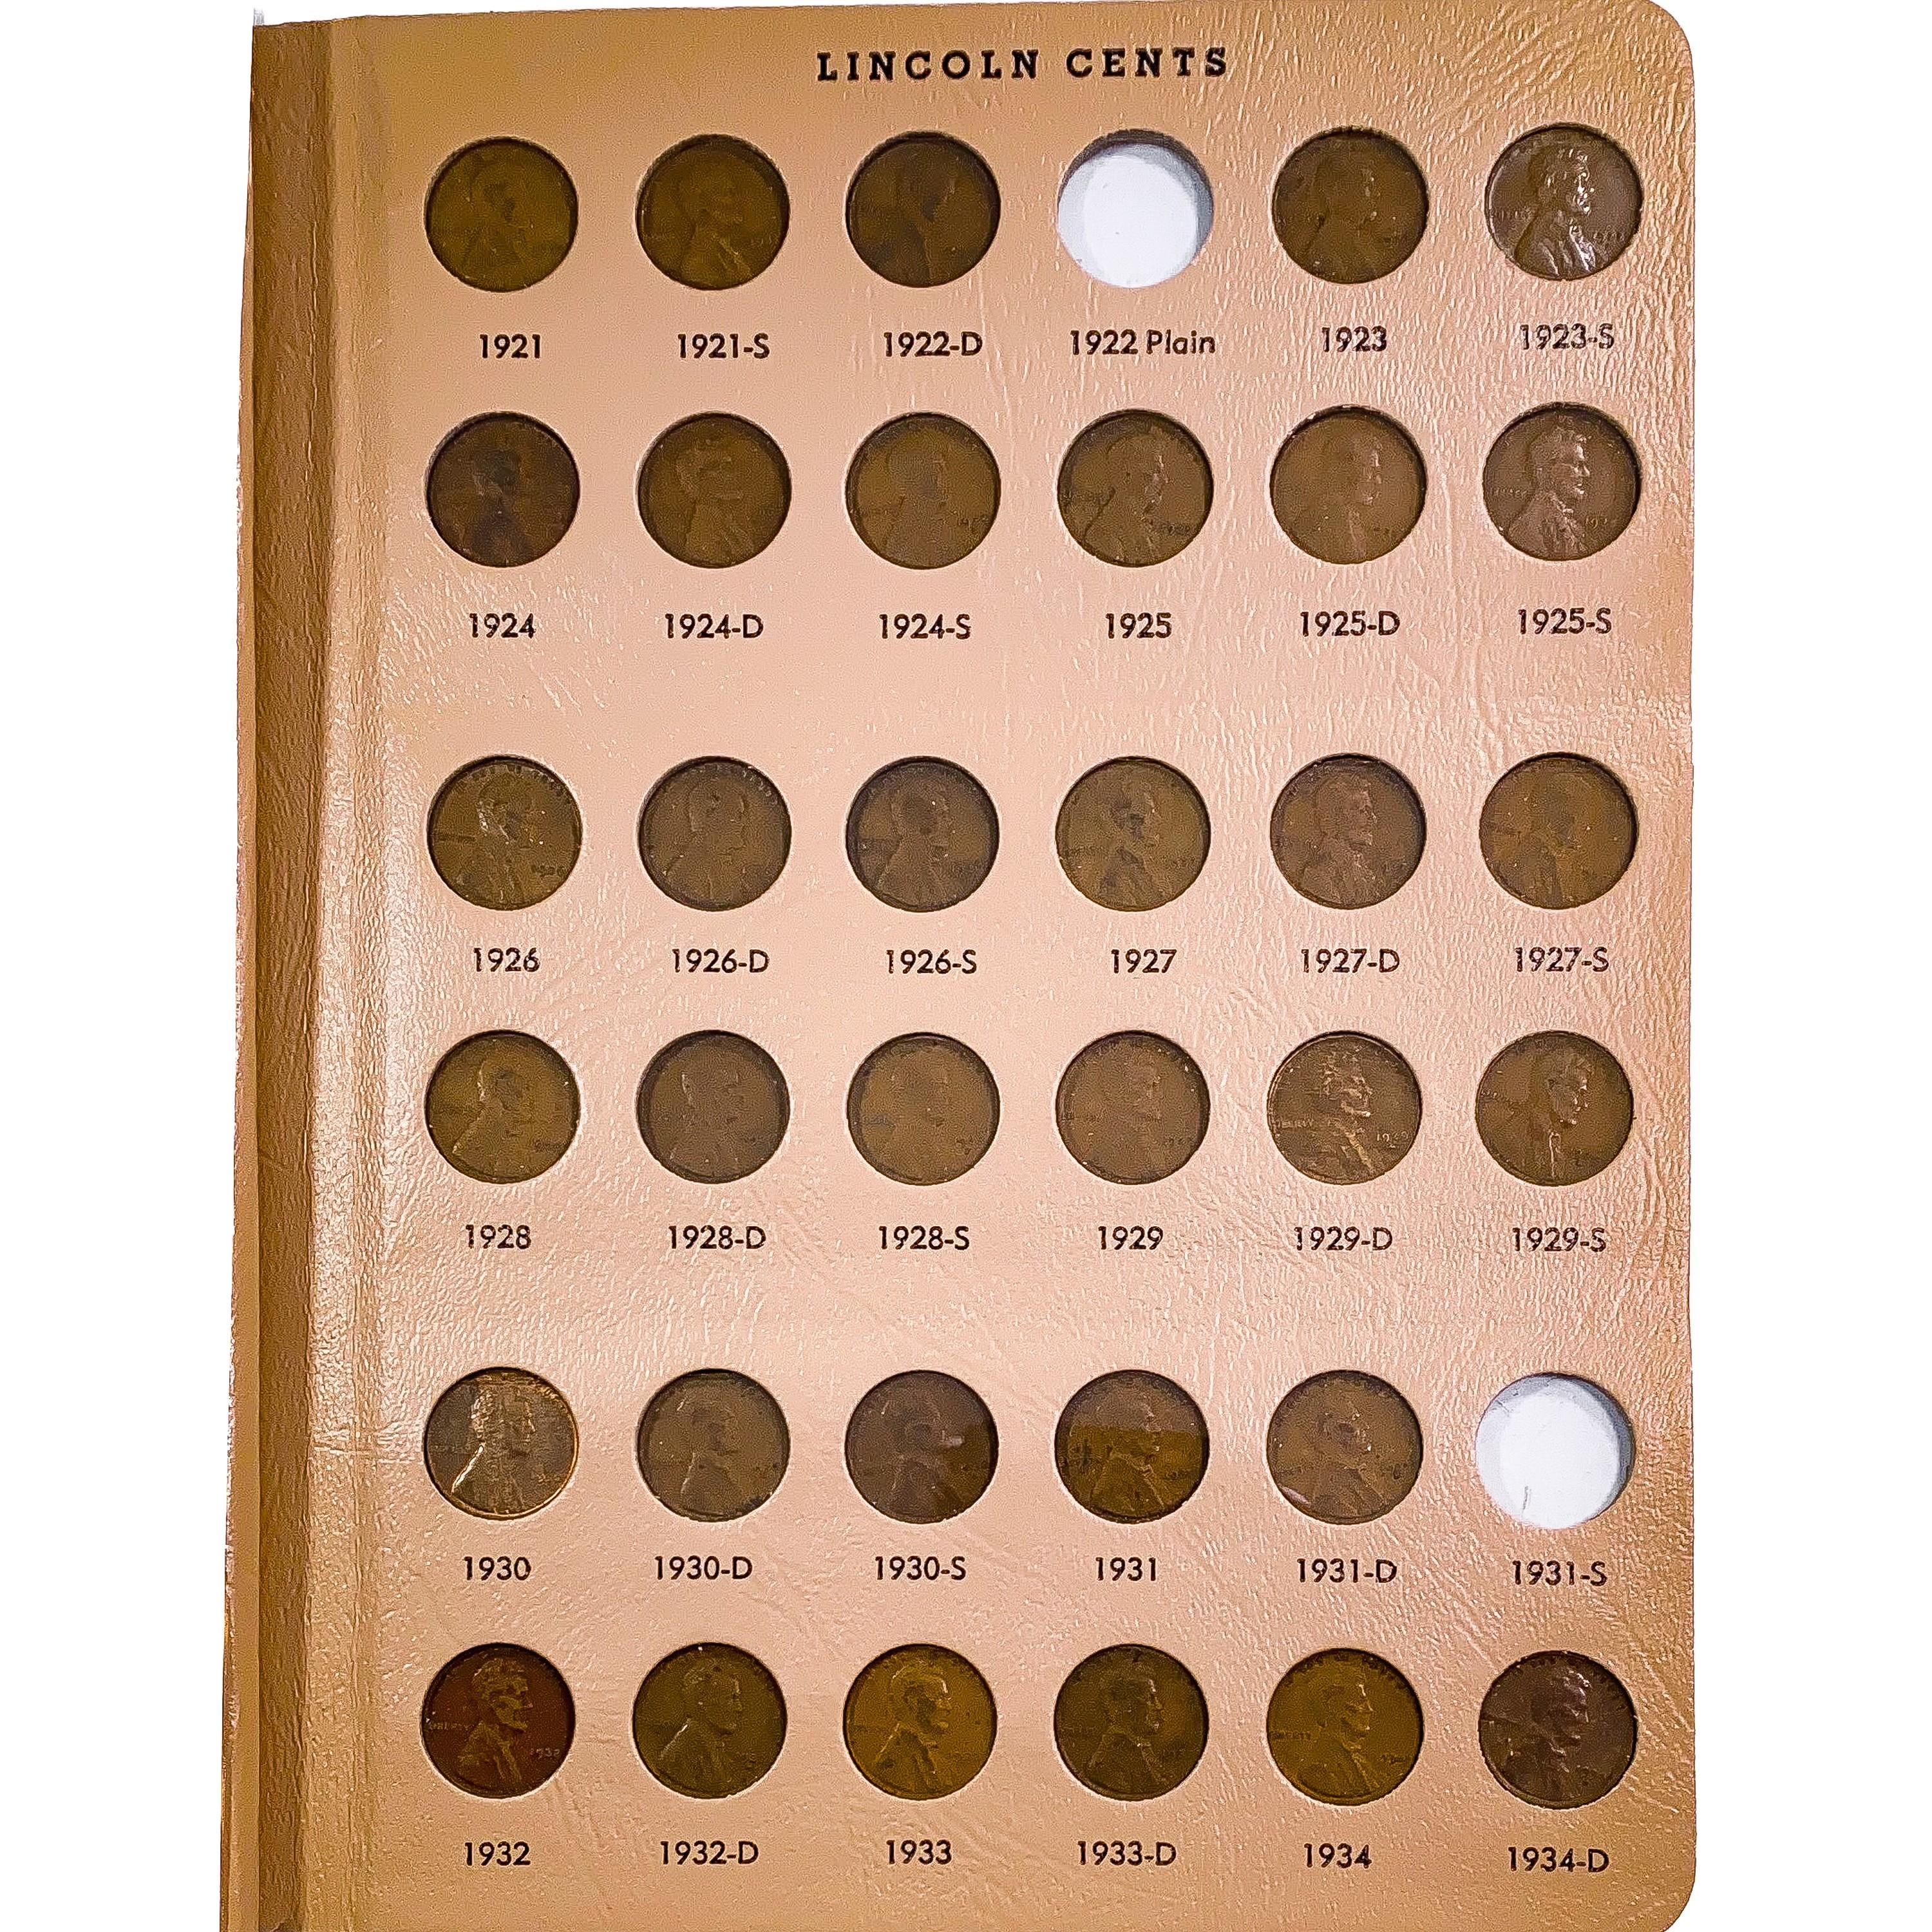 1909-1991 Lincoln Cent Collection [208 Coins]